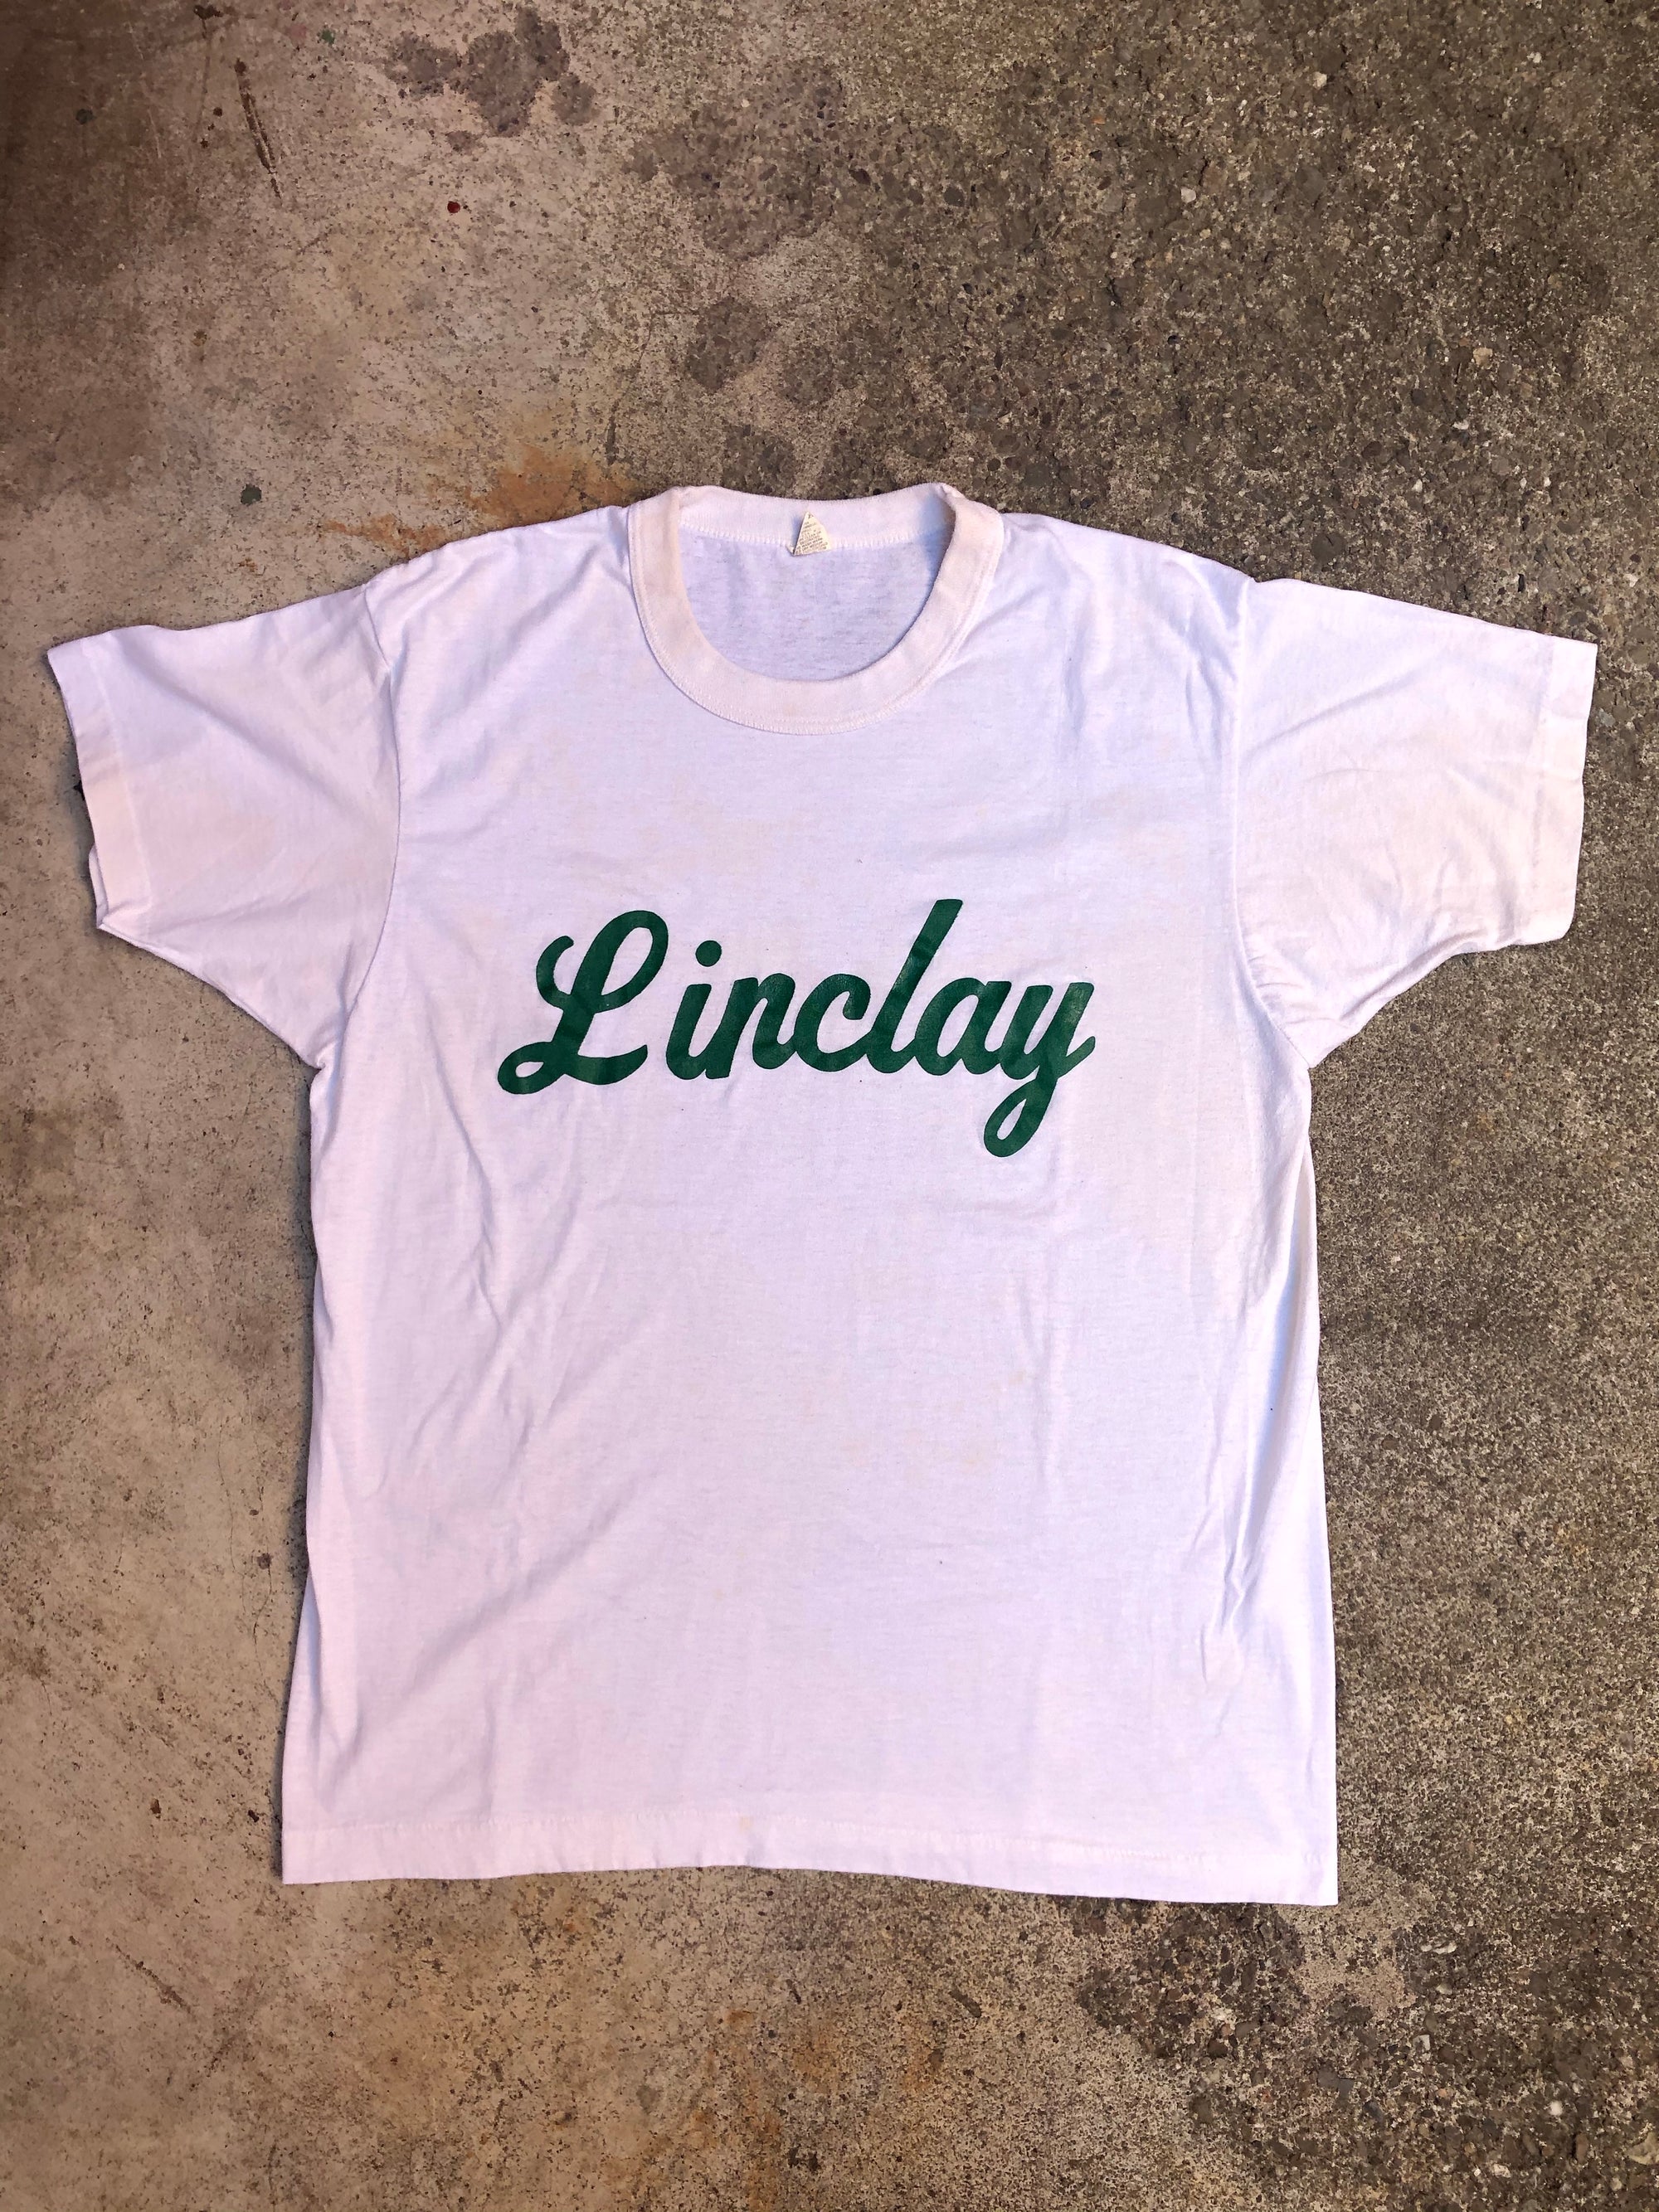 1980s White Green “Linclay” Tee